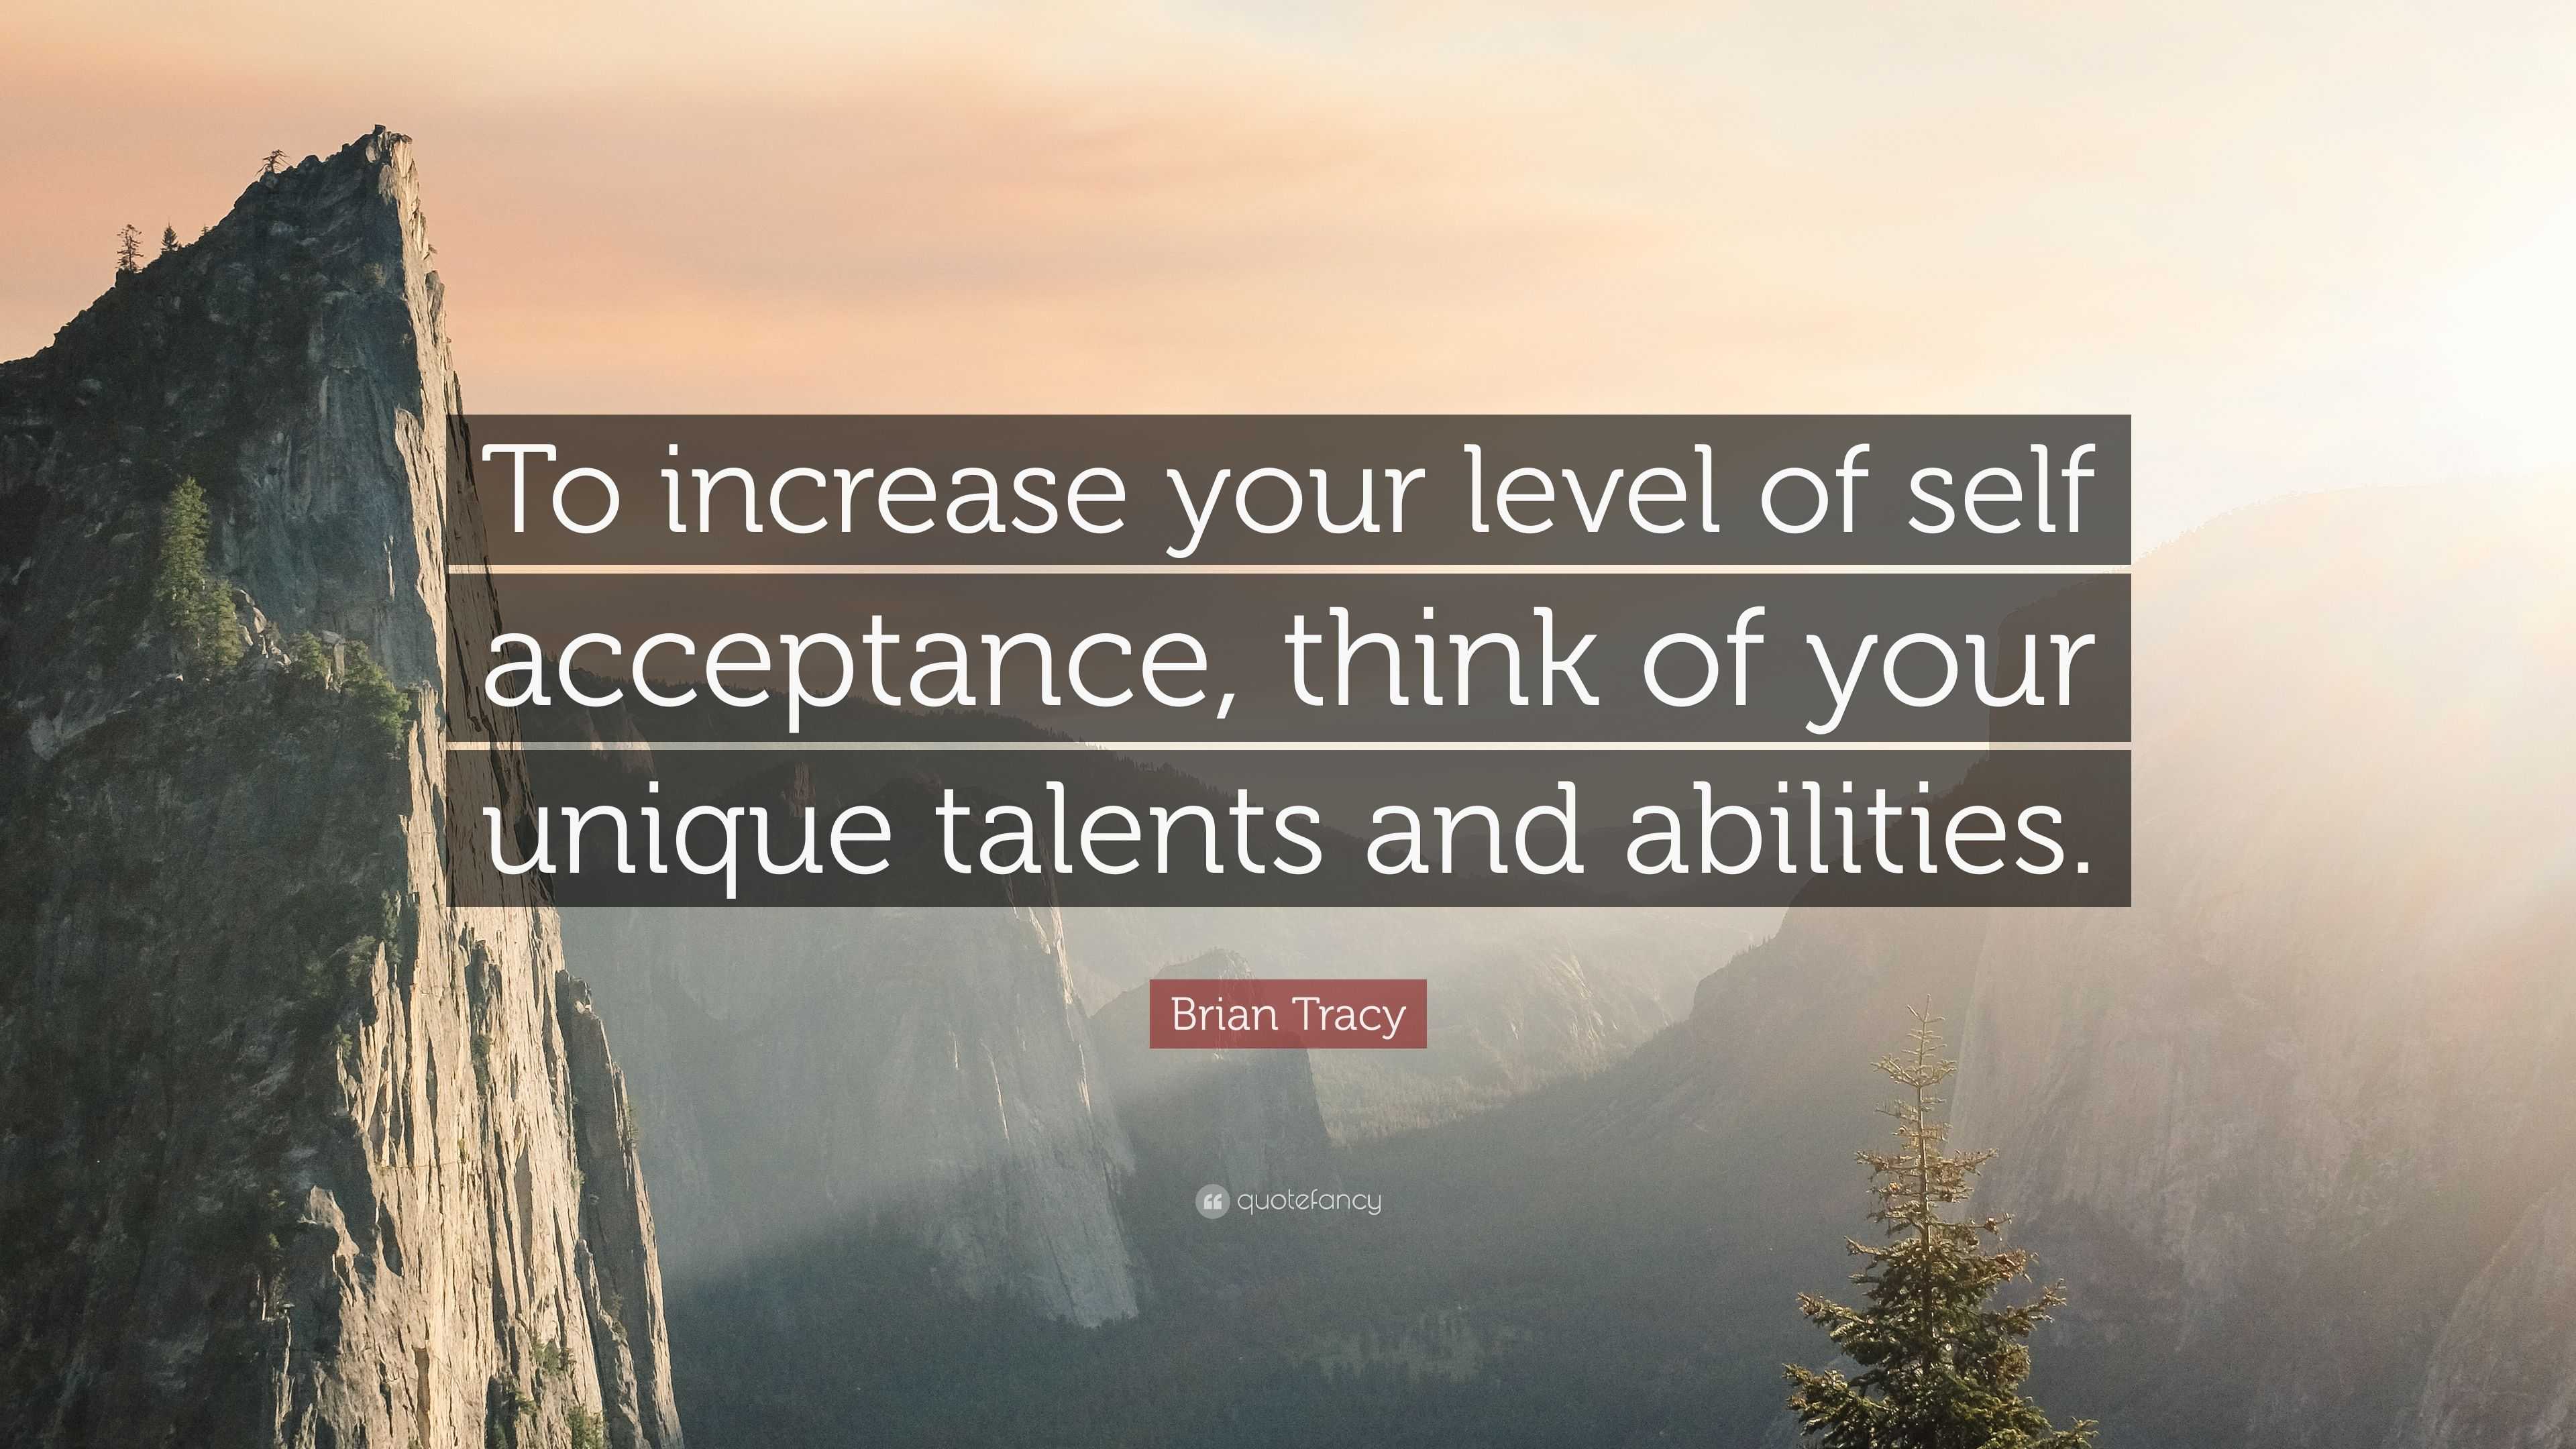 Brian Tracy Quote: “To increase your level of self acceptance, think of ...